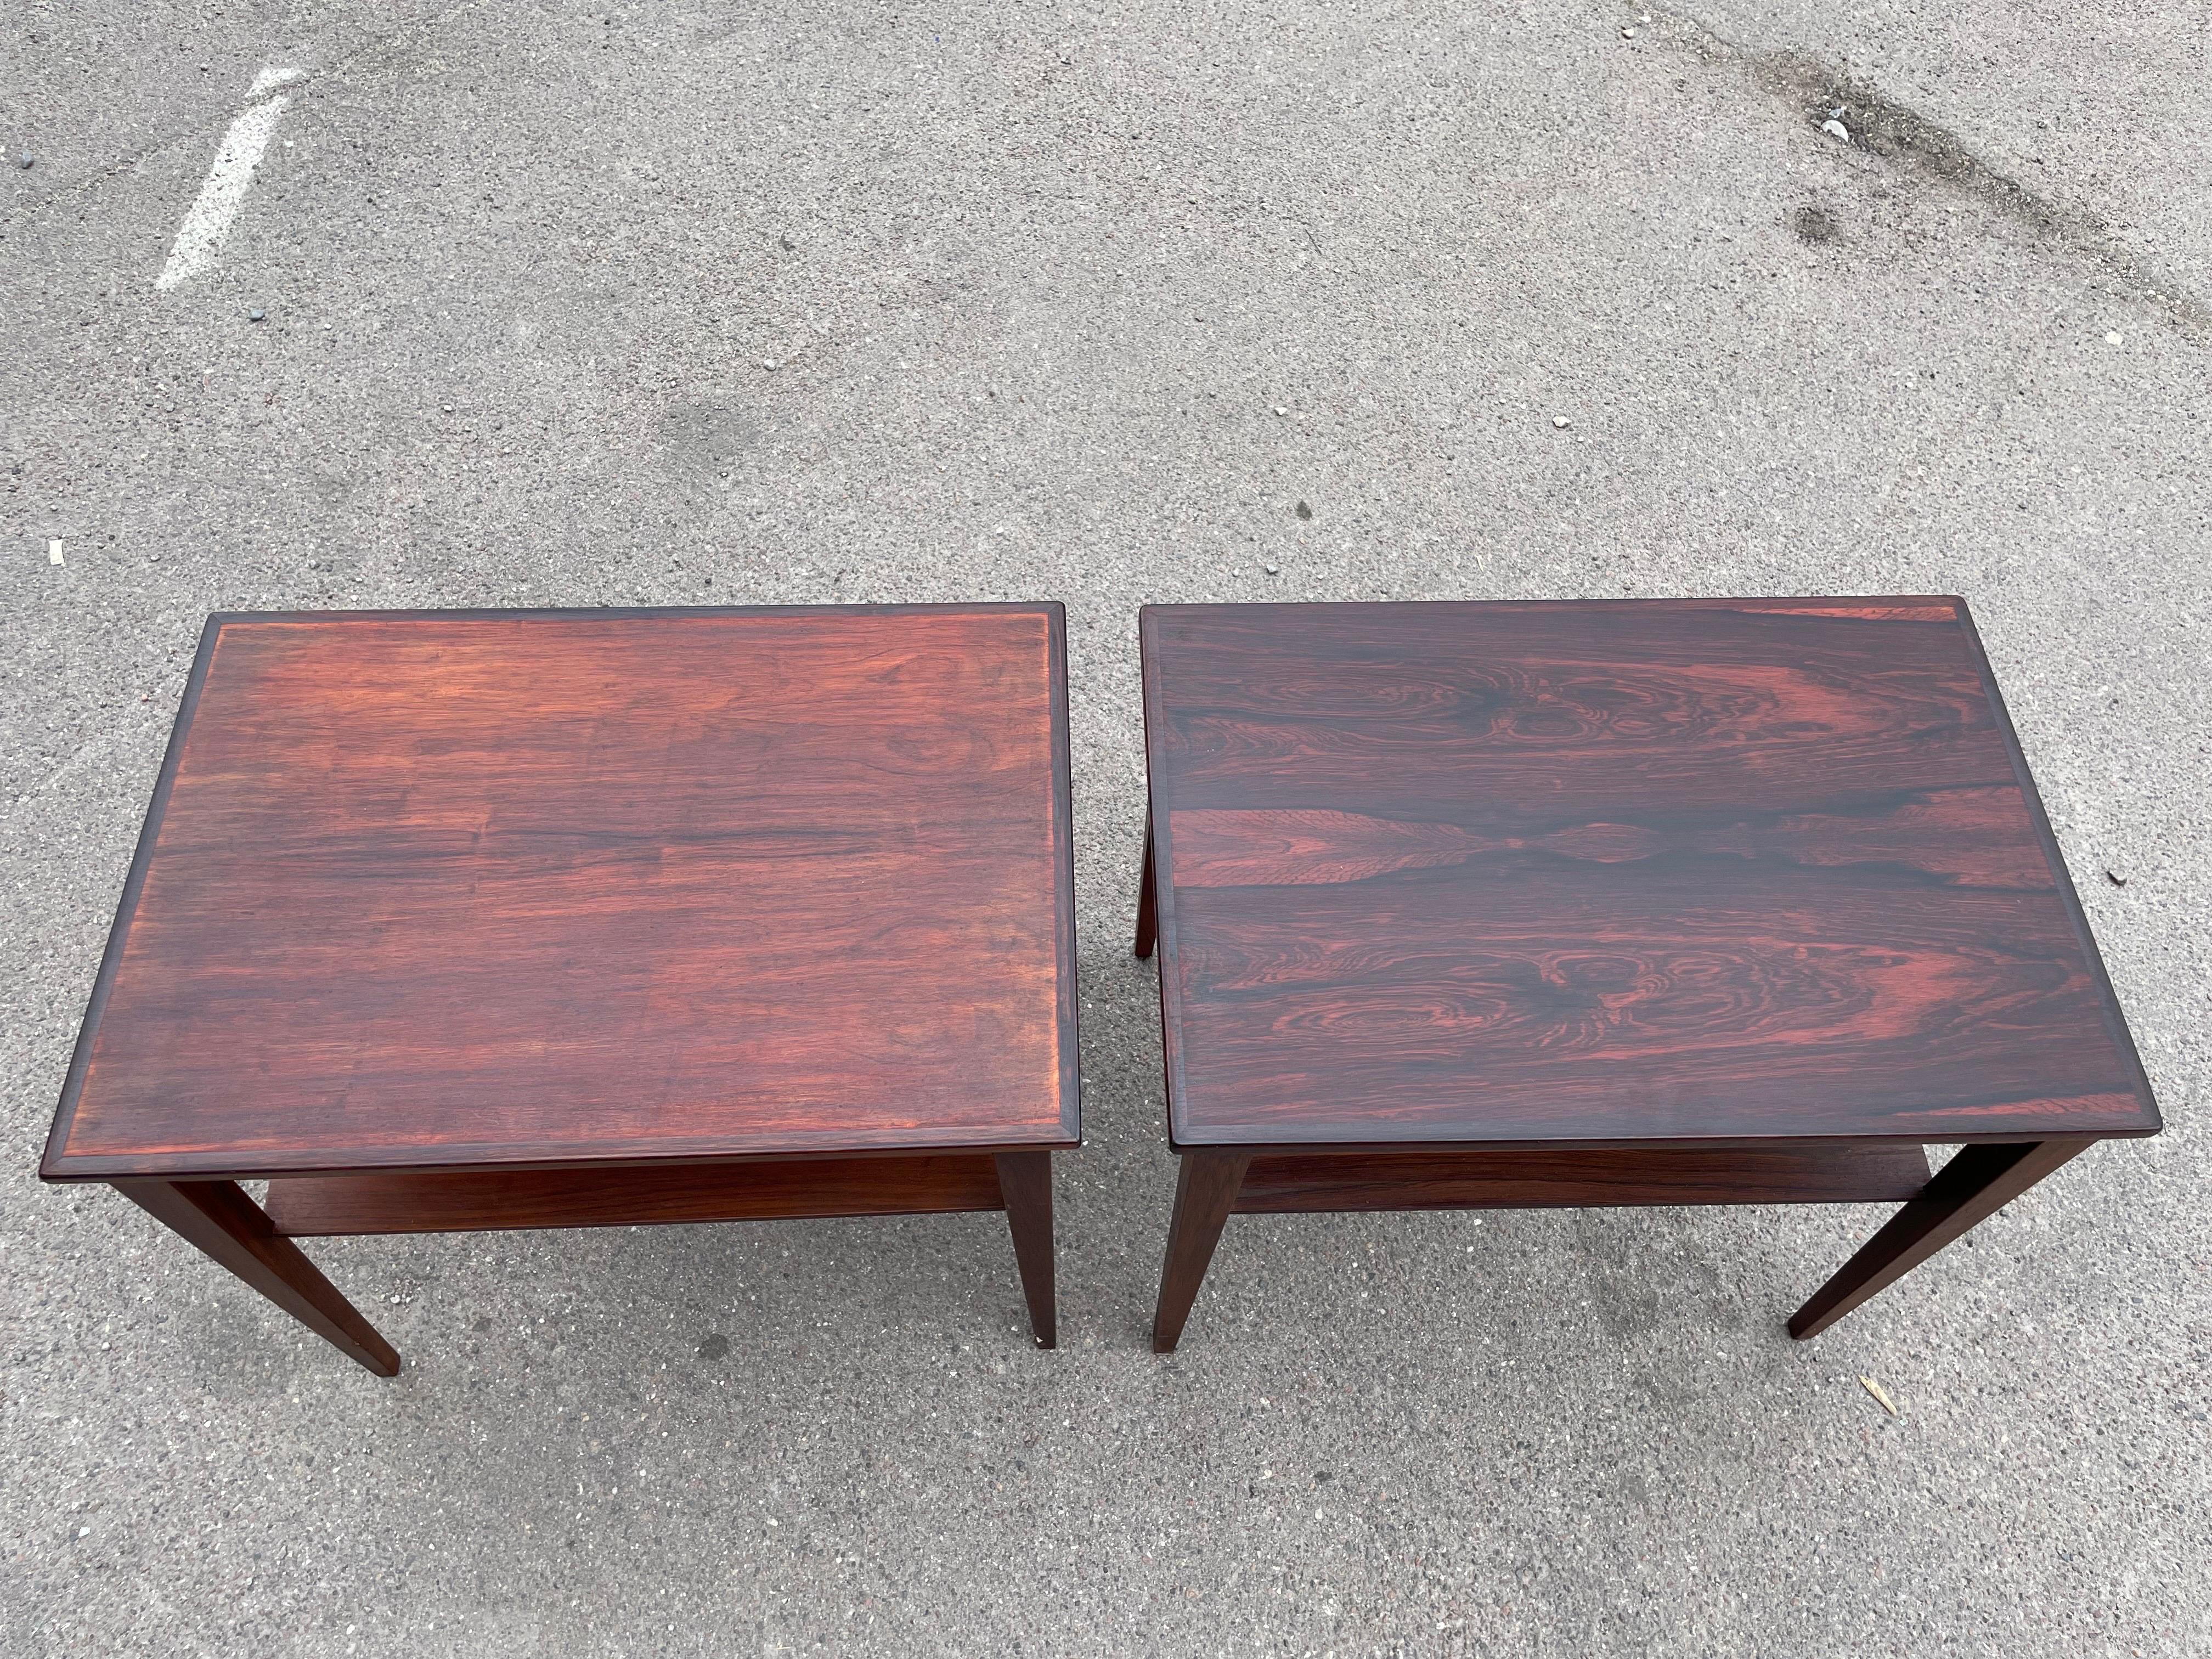 Pair of Danish Mid-Century Modern Nightstands or Sidetables from the, 1960s For Sale 3